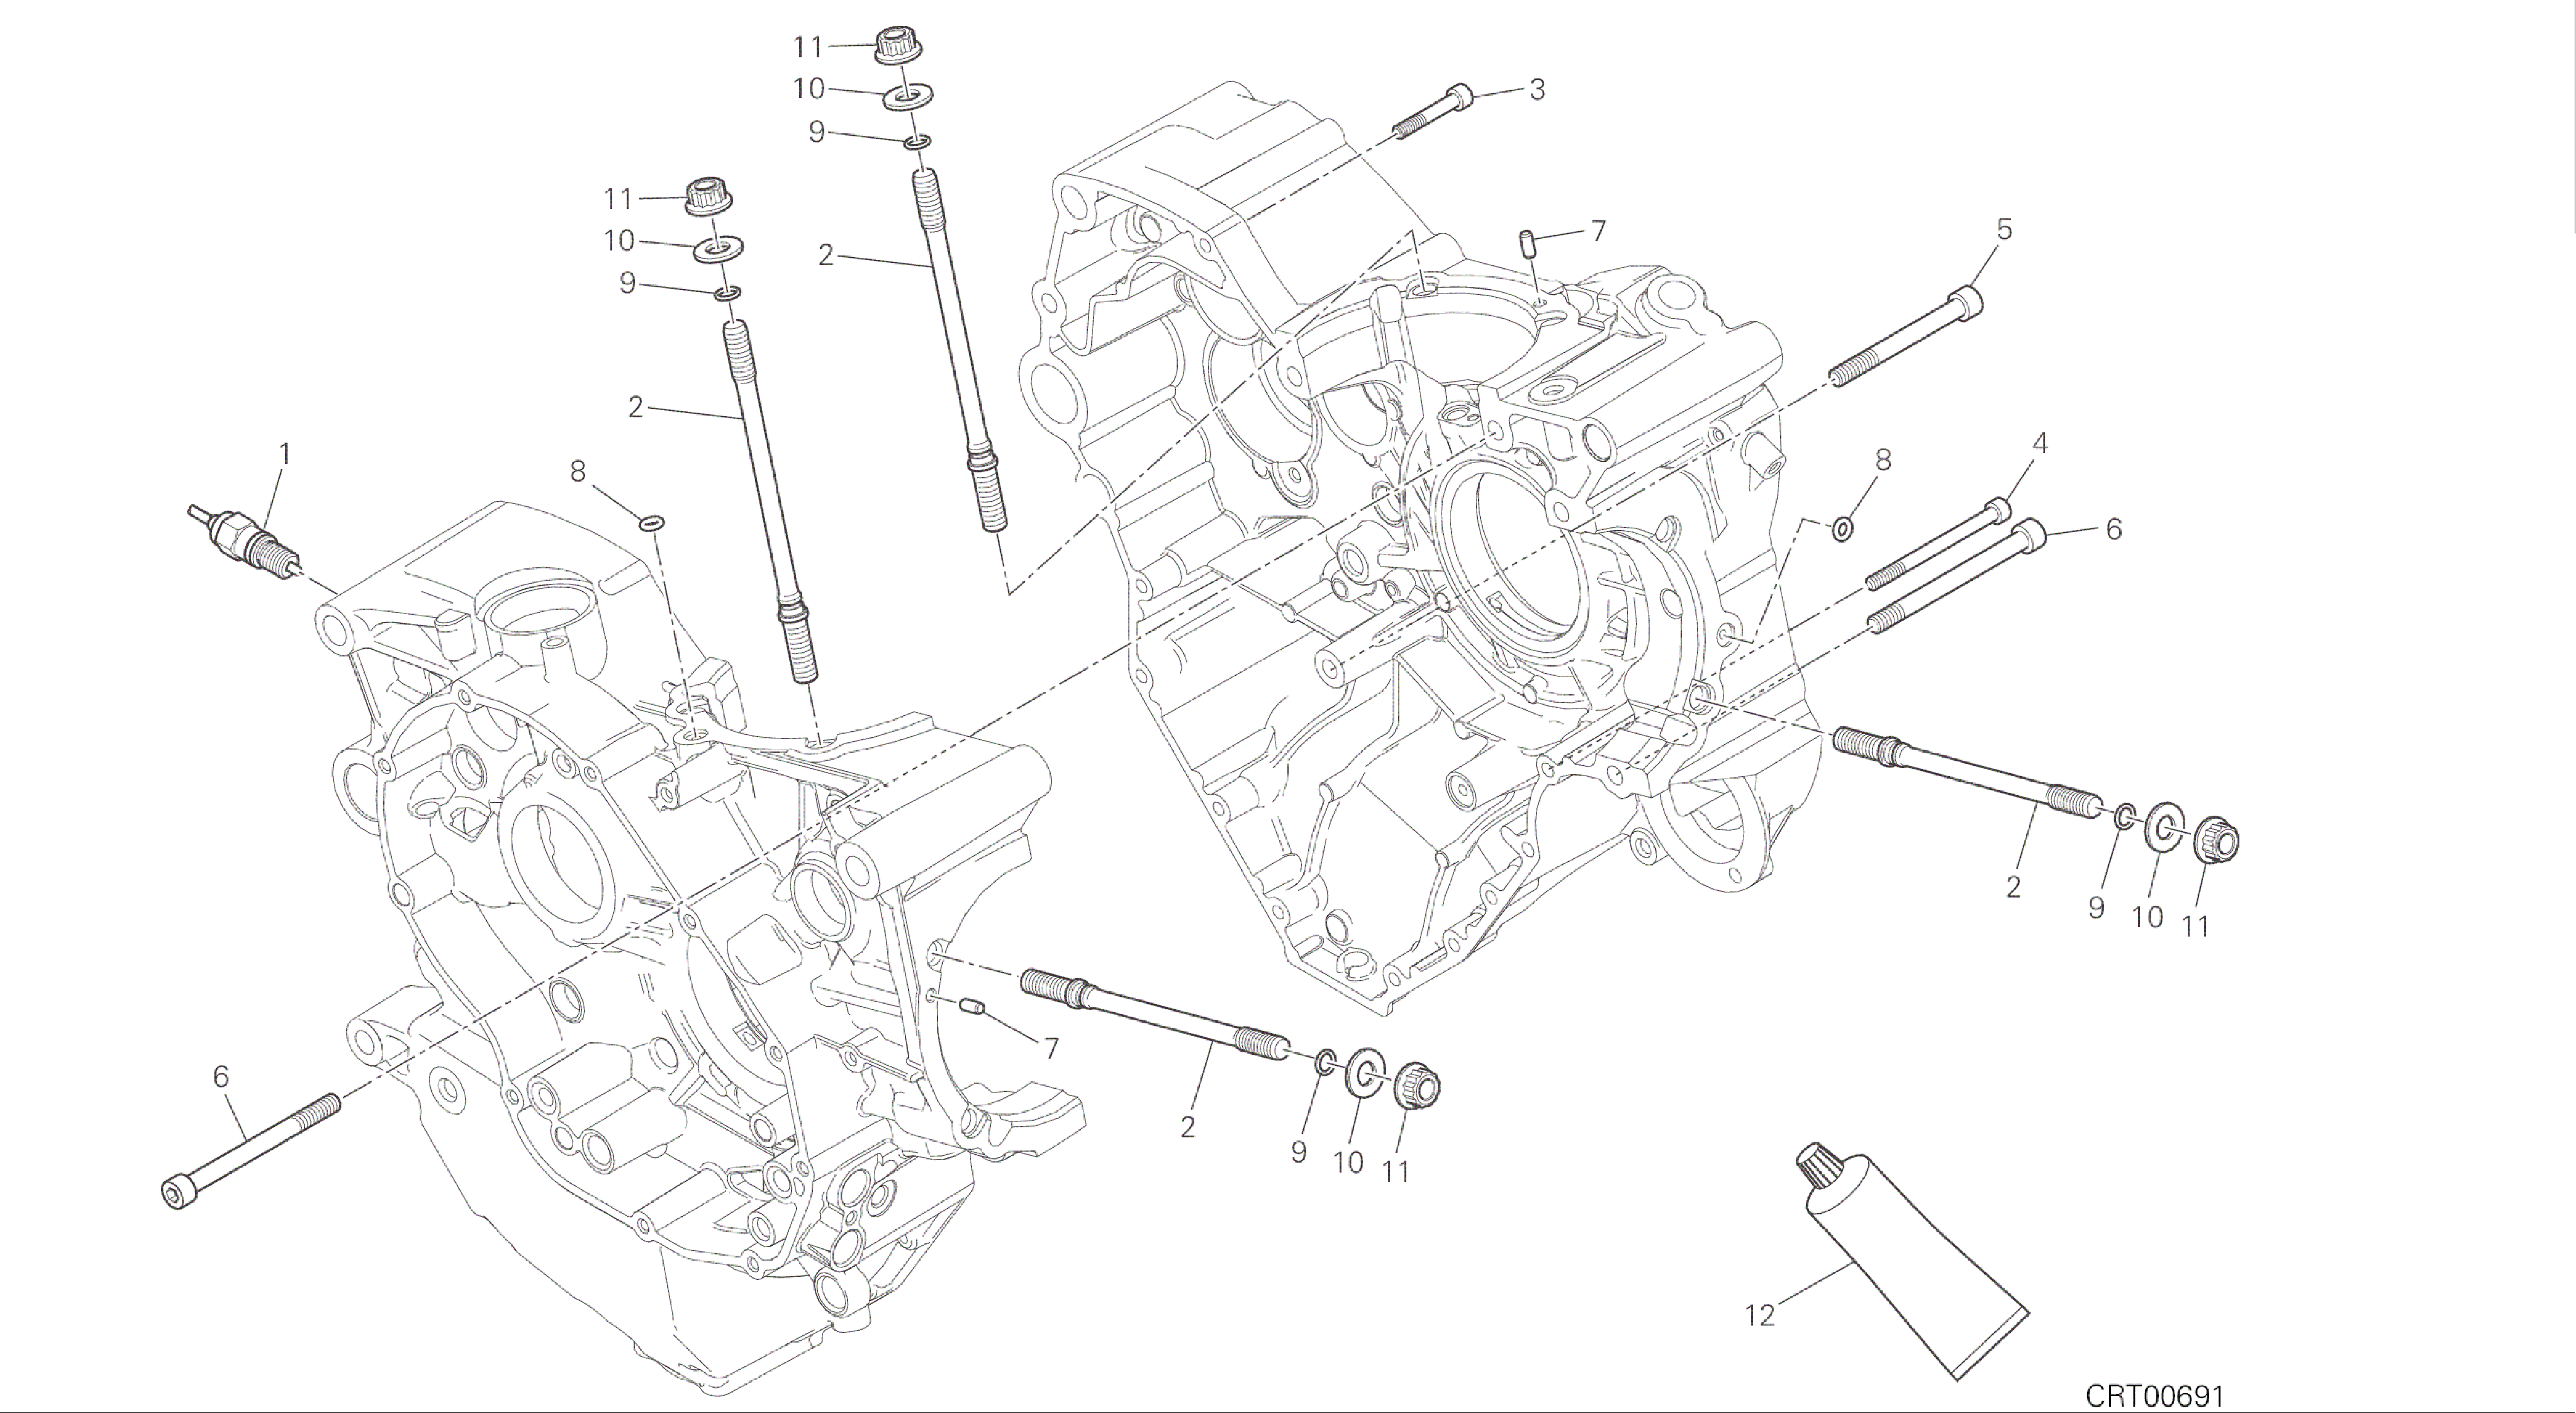 DRAWING 10A - HALF-CRANKCASES PAIR [MOD:MS1200S]GROUP ENGINE